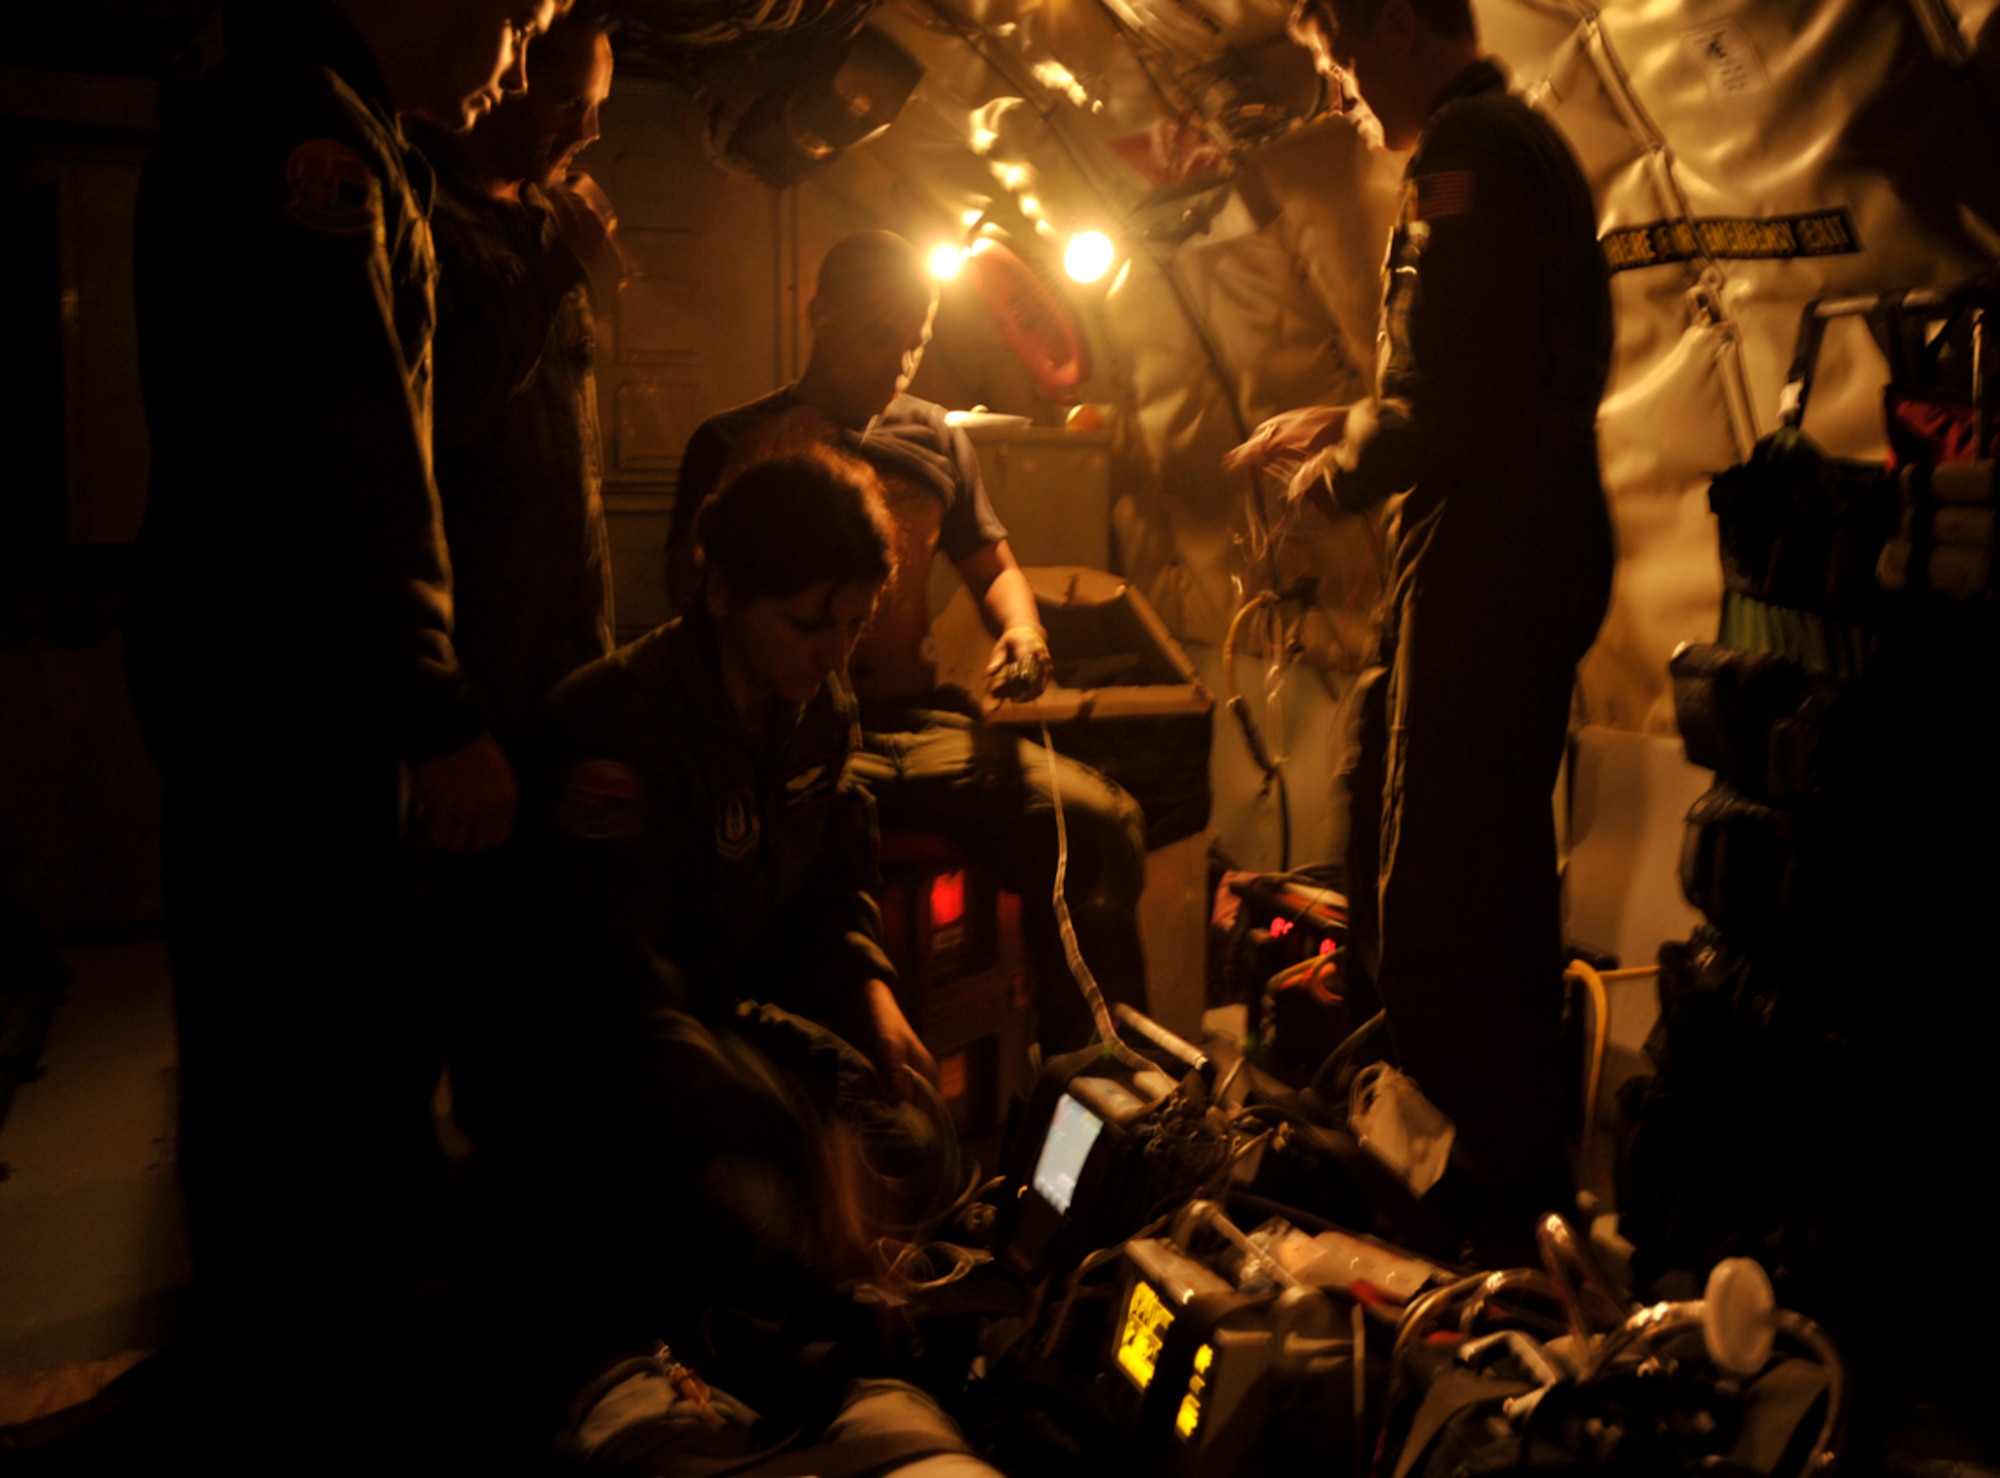 Aeromedical Evacuation Airmen work within the dark confines of a KC-135 Stratotanker flown by members of the 931st Air Refueling Group during a training mission. Air Force officials recently tested a modification that provide more electrical outlets on KC-135s for medical equipment. (U.S. Air Force photo/Tech. Sgt. Jason Schaap) 